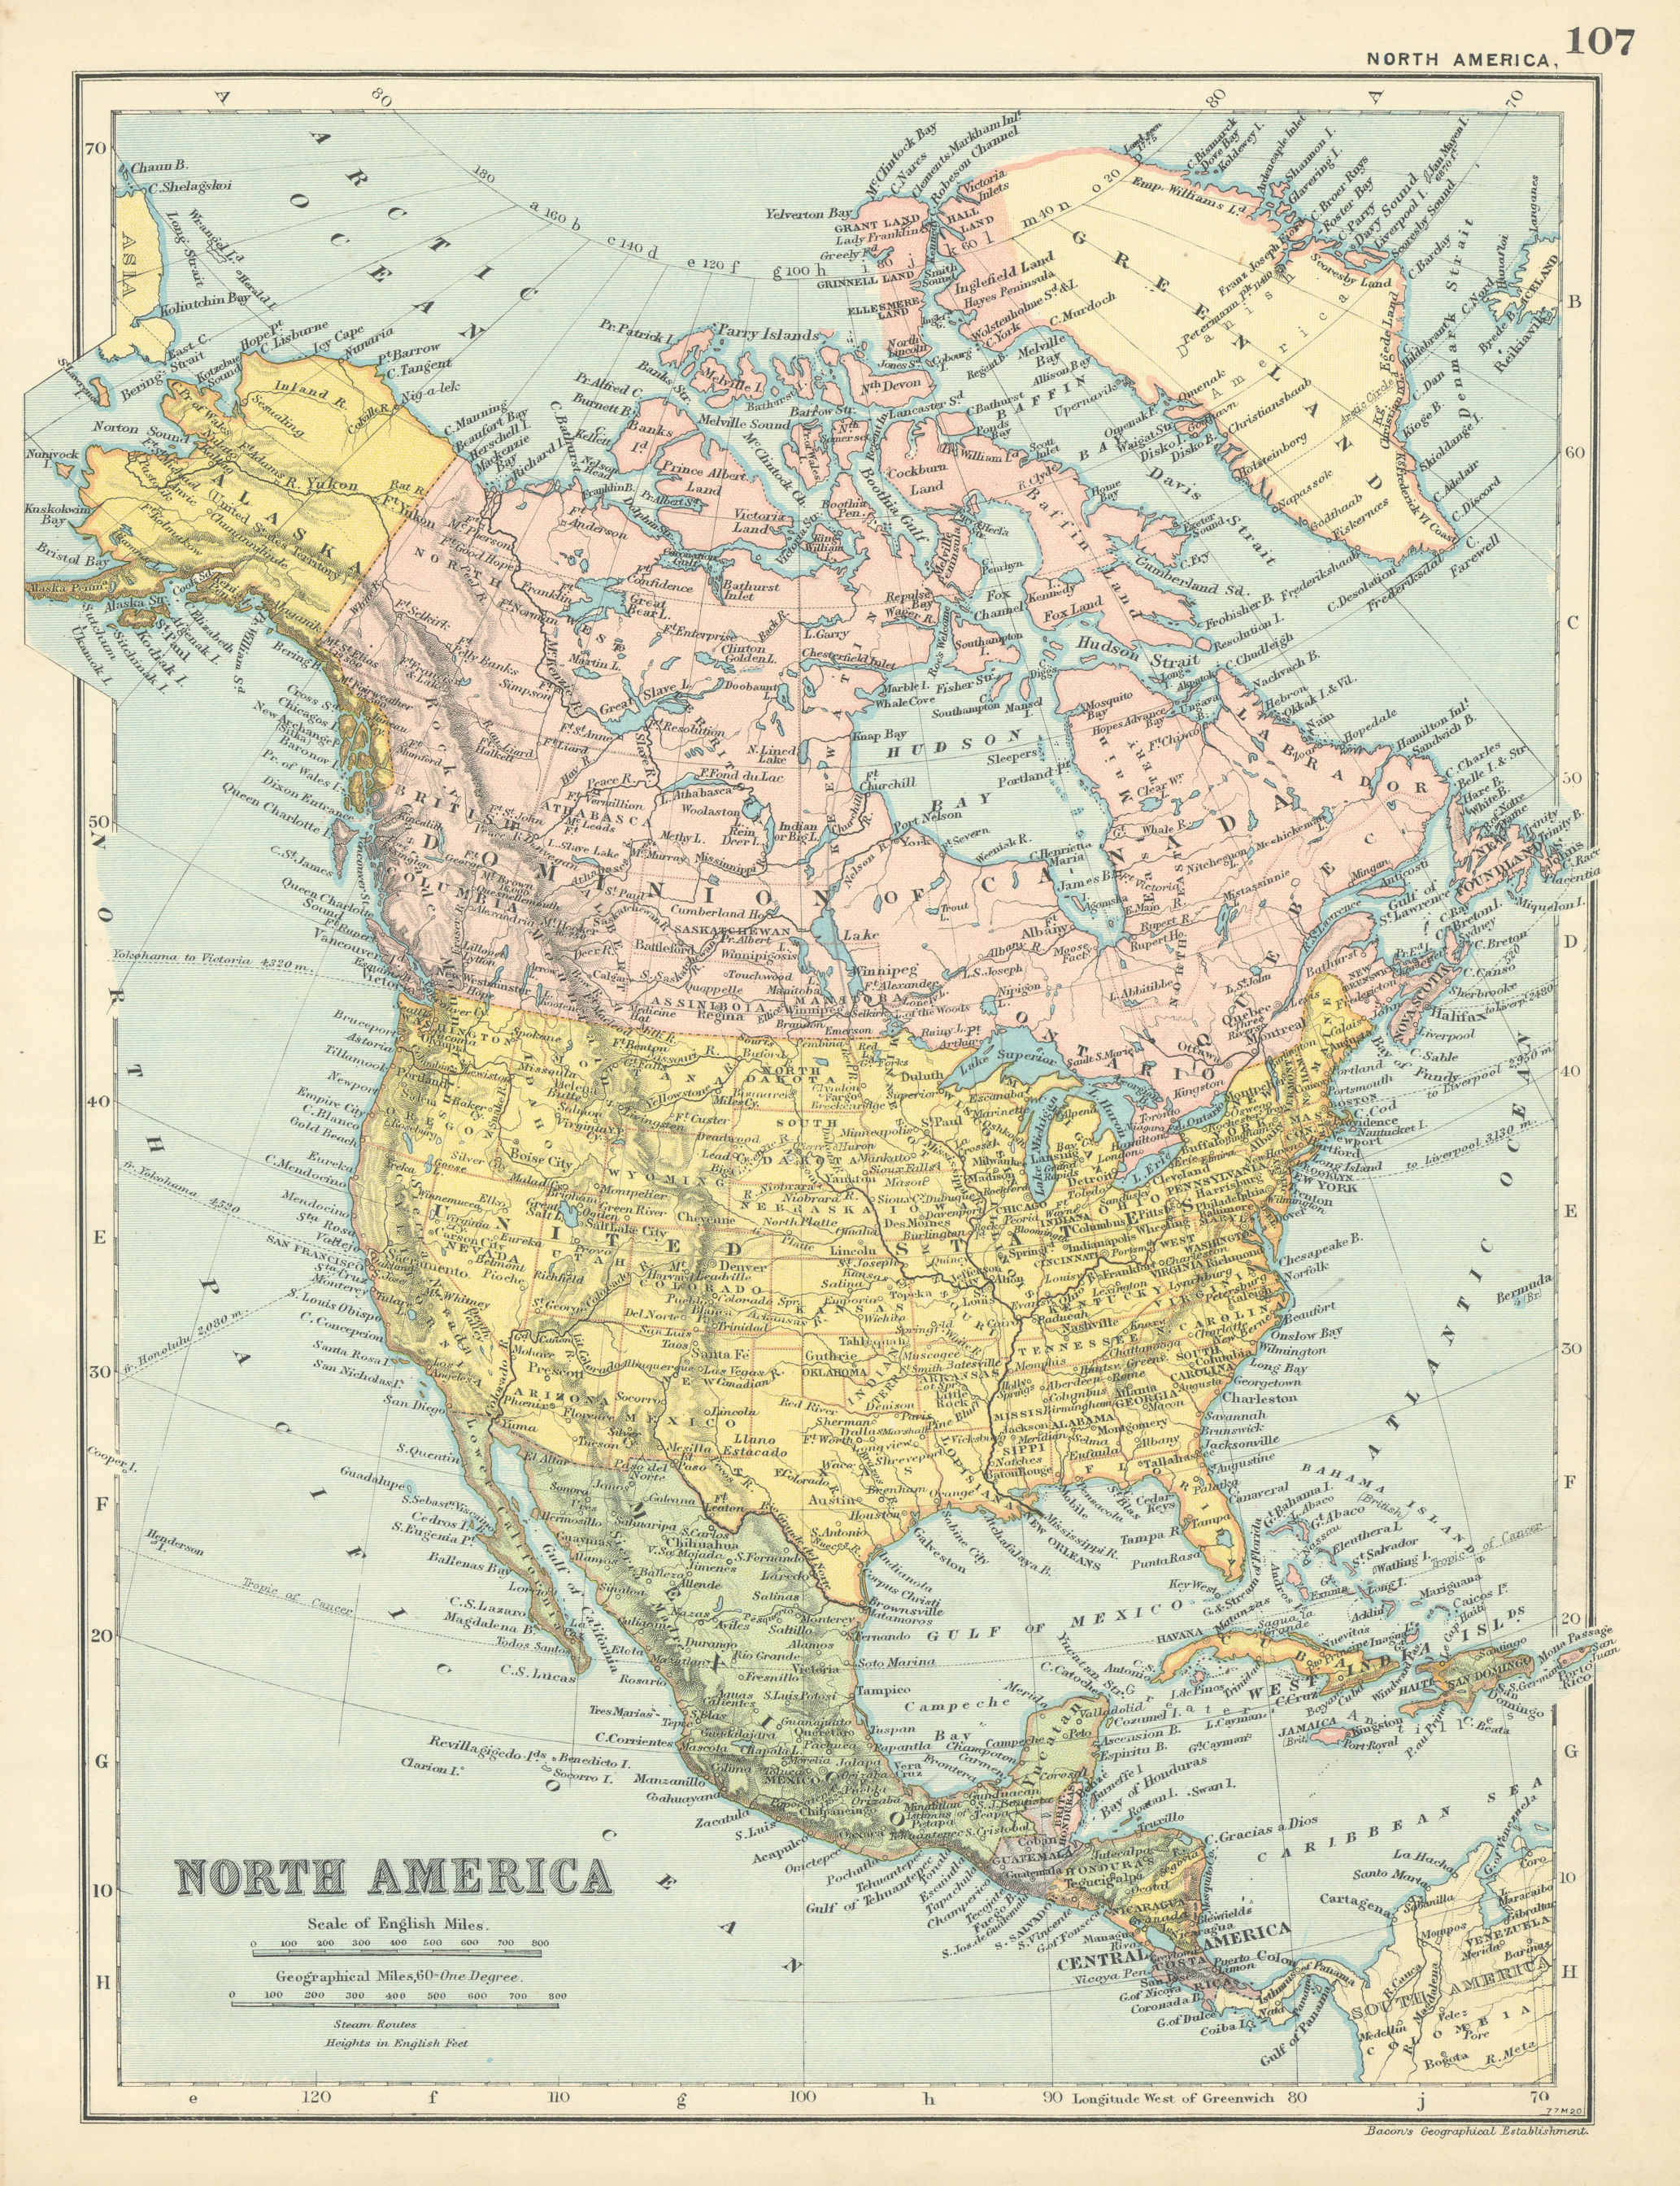 Associate Product NORTH AMERICA Canada USA Mexico Central America West Indies by GW BACON 1898 map